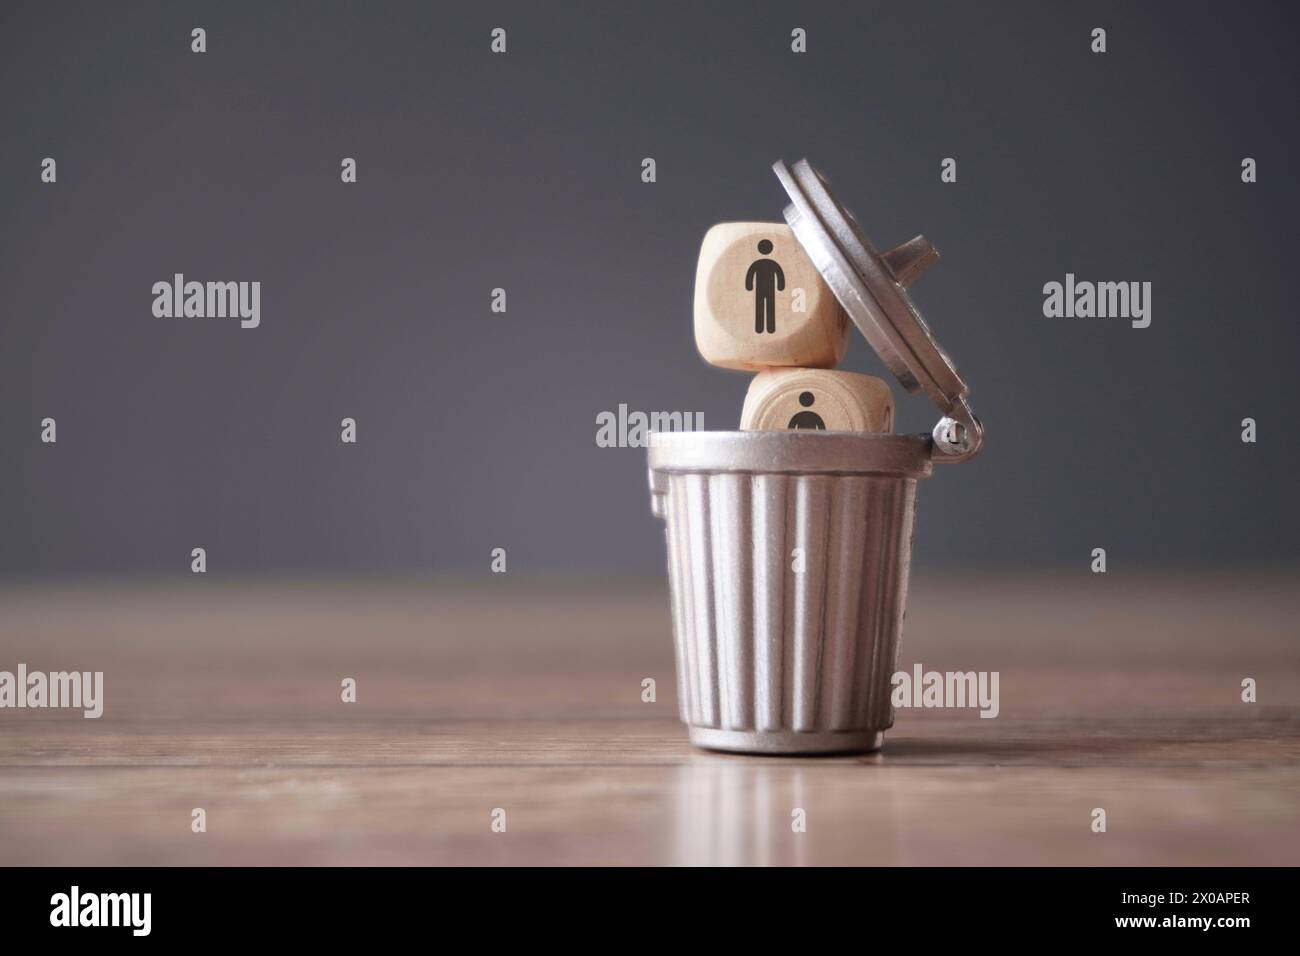 Relationship, remove toxic people concept. Wooden cube with people icon inside dustbin, trash can. Stock Photo